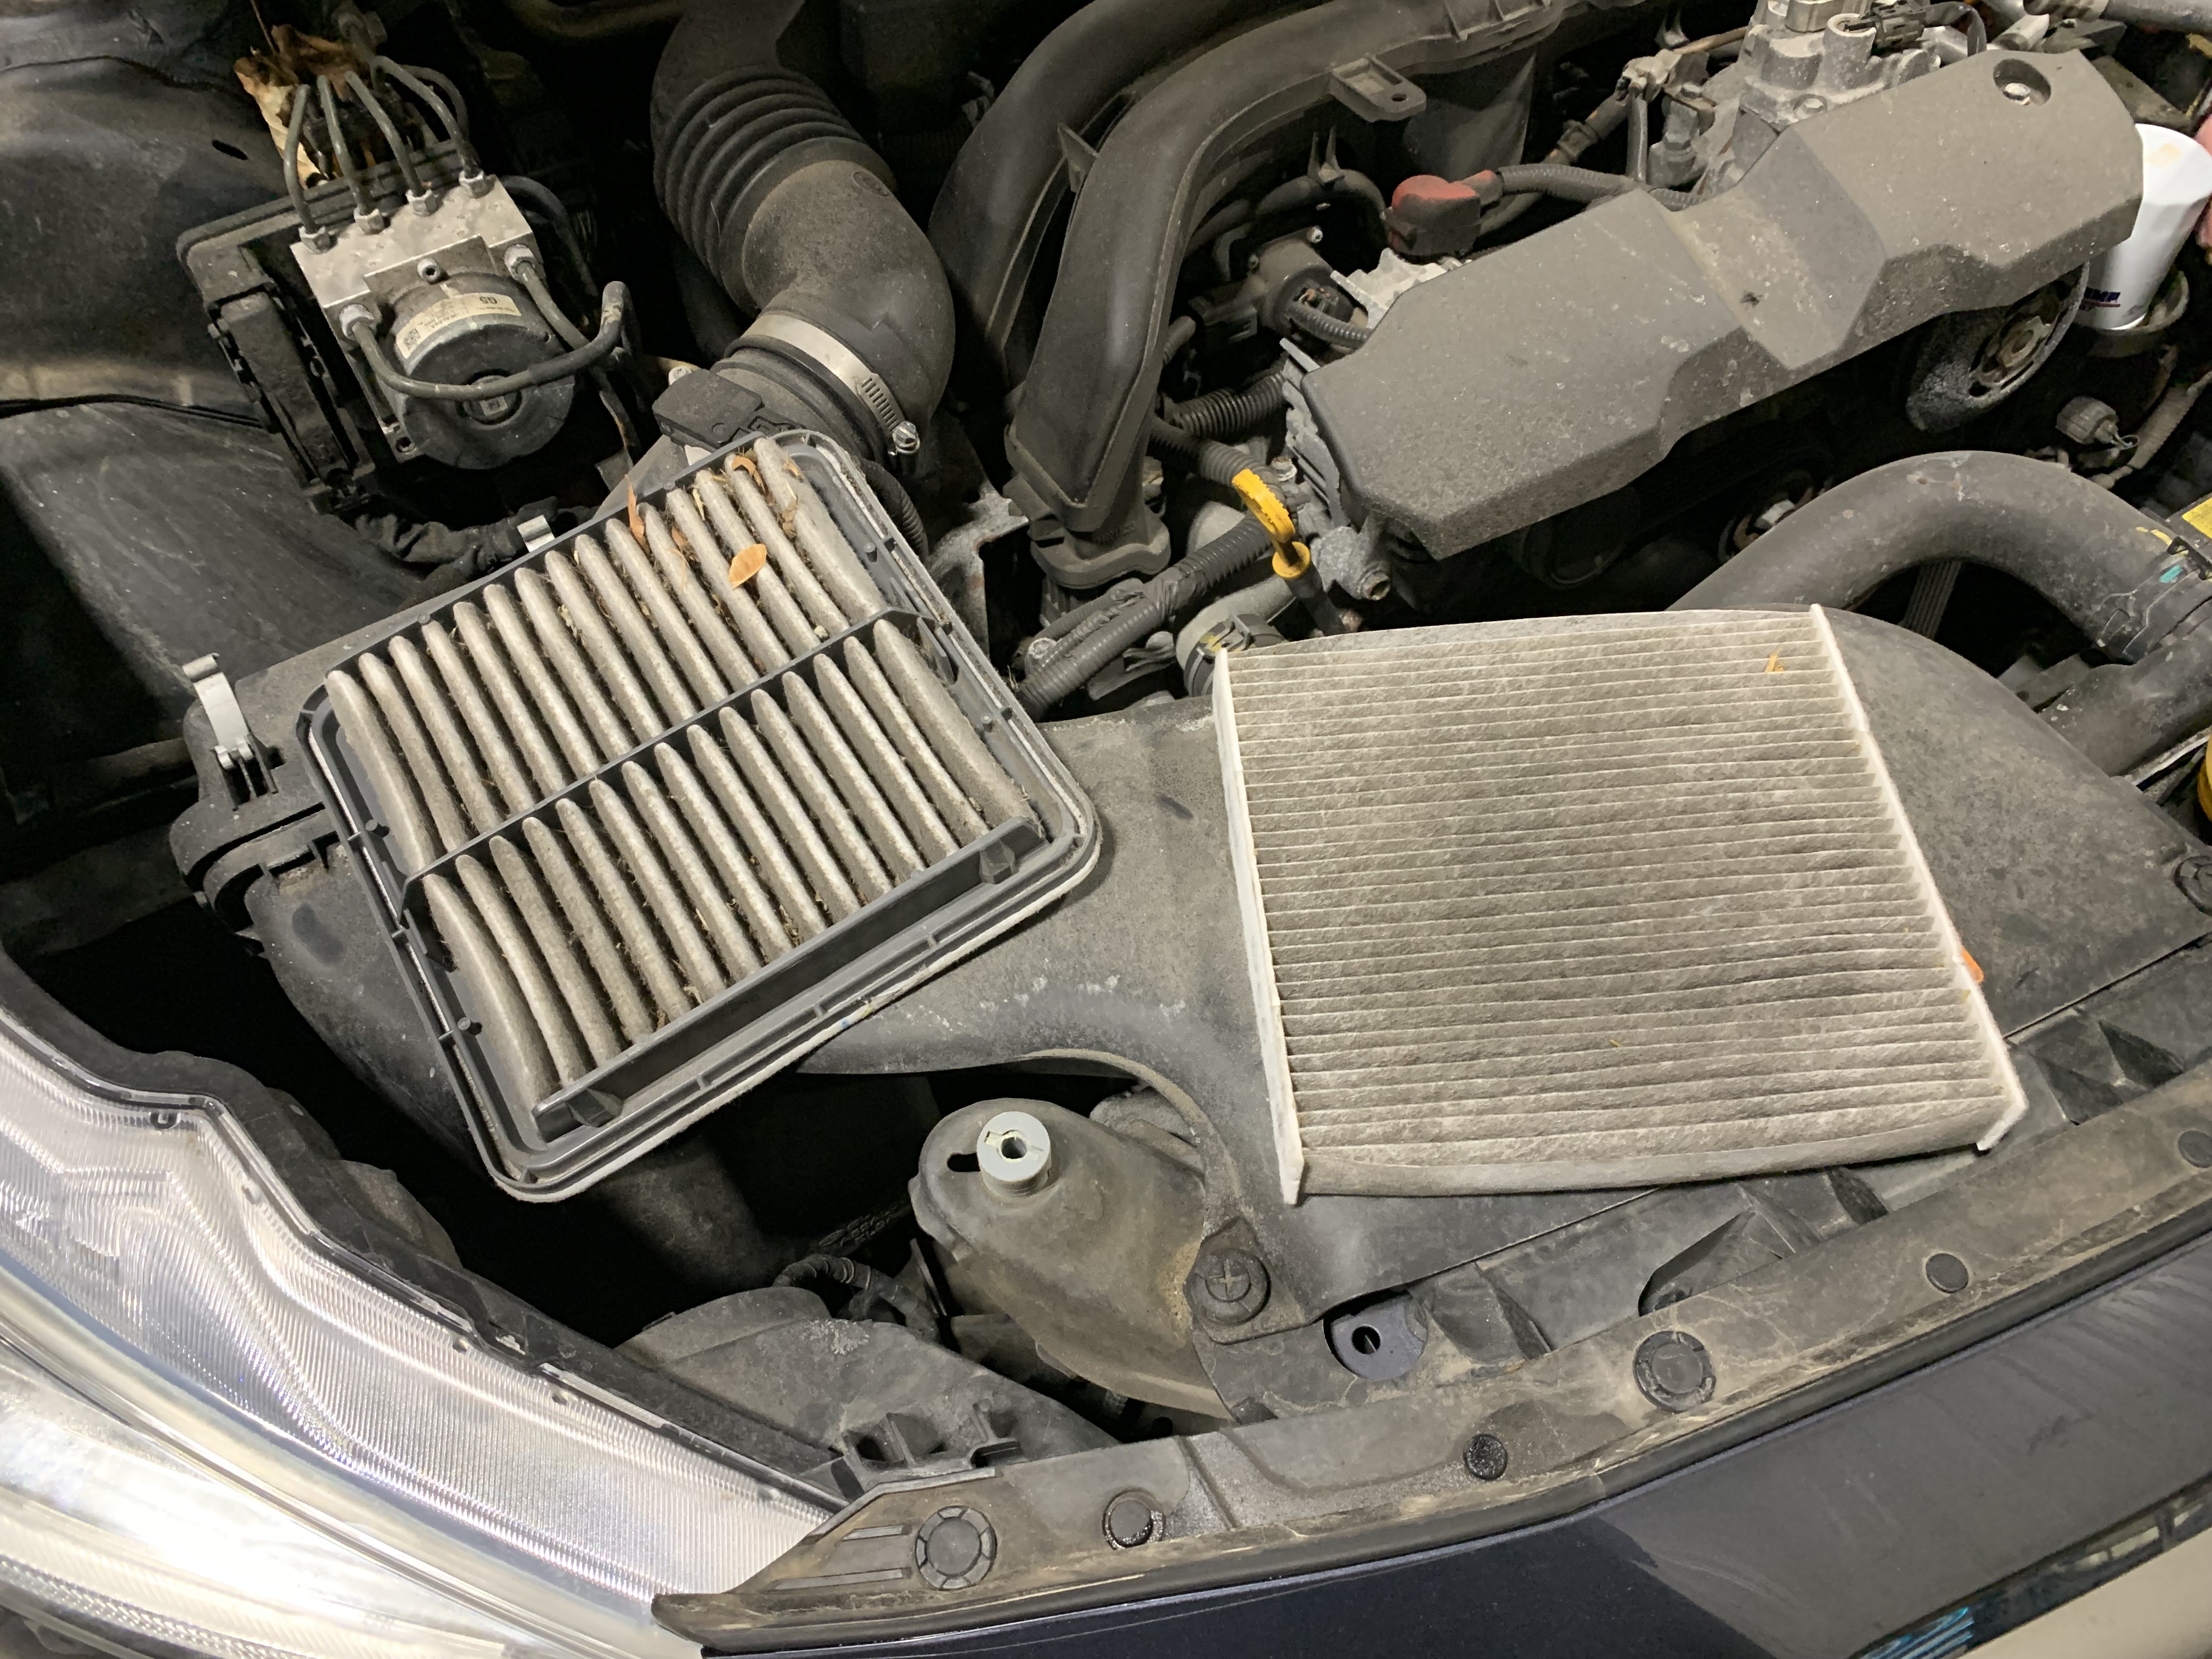 https://www.louscarcare.com/Files/Blog/images/Dirty%20Car%20Air%20Filters%20Lou's%20Car%20Care%20Baldwinsville%20NY%2013027.JPG